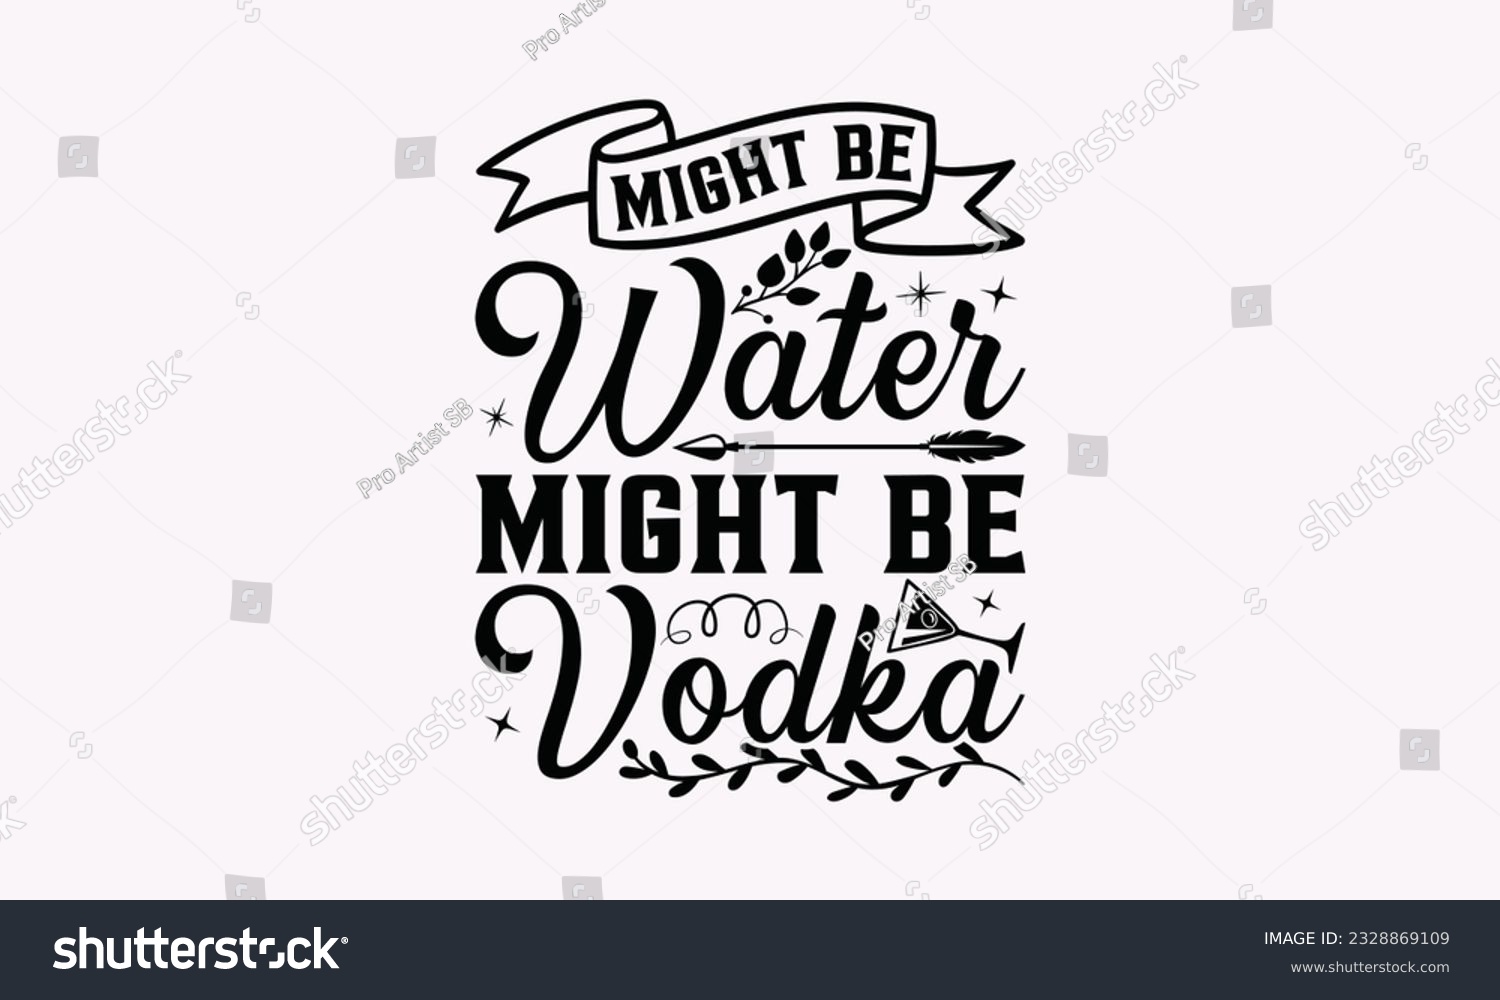 SVG of Might Be Water Might Be Vodka - Alcohol SVG Design, Drink Quotes, Calligraphy graphic design, Typography poster with old style camera and quote. svg